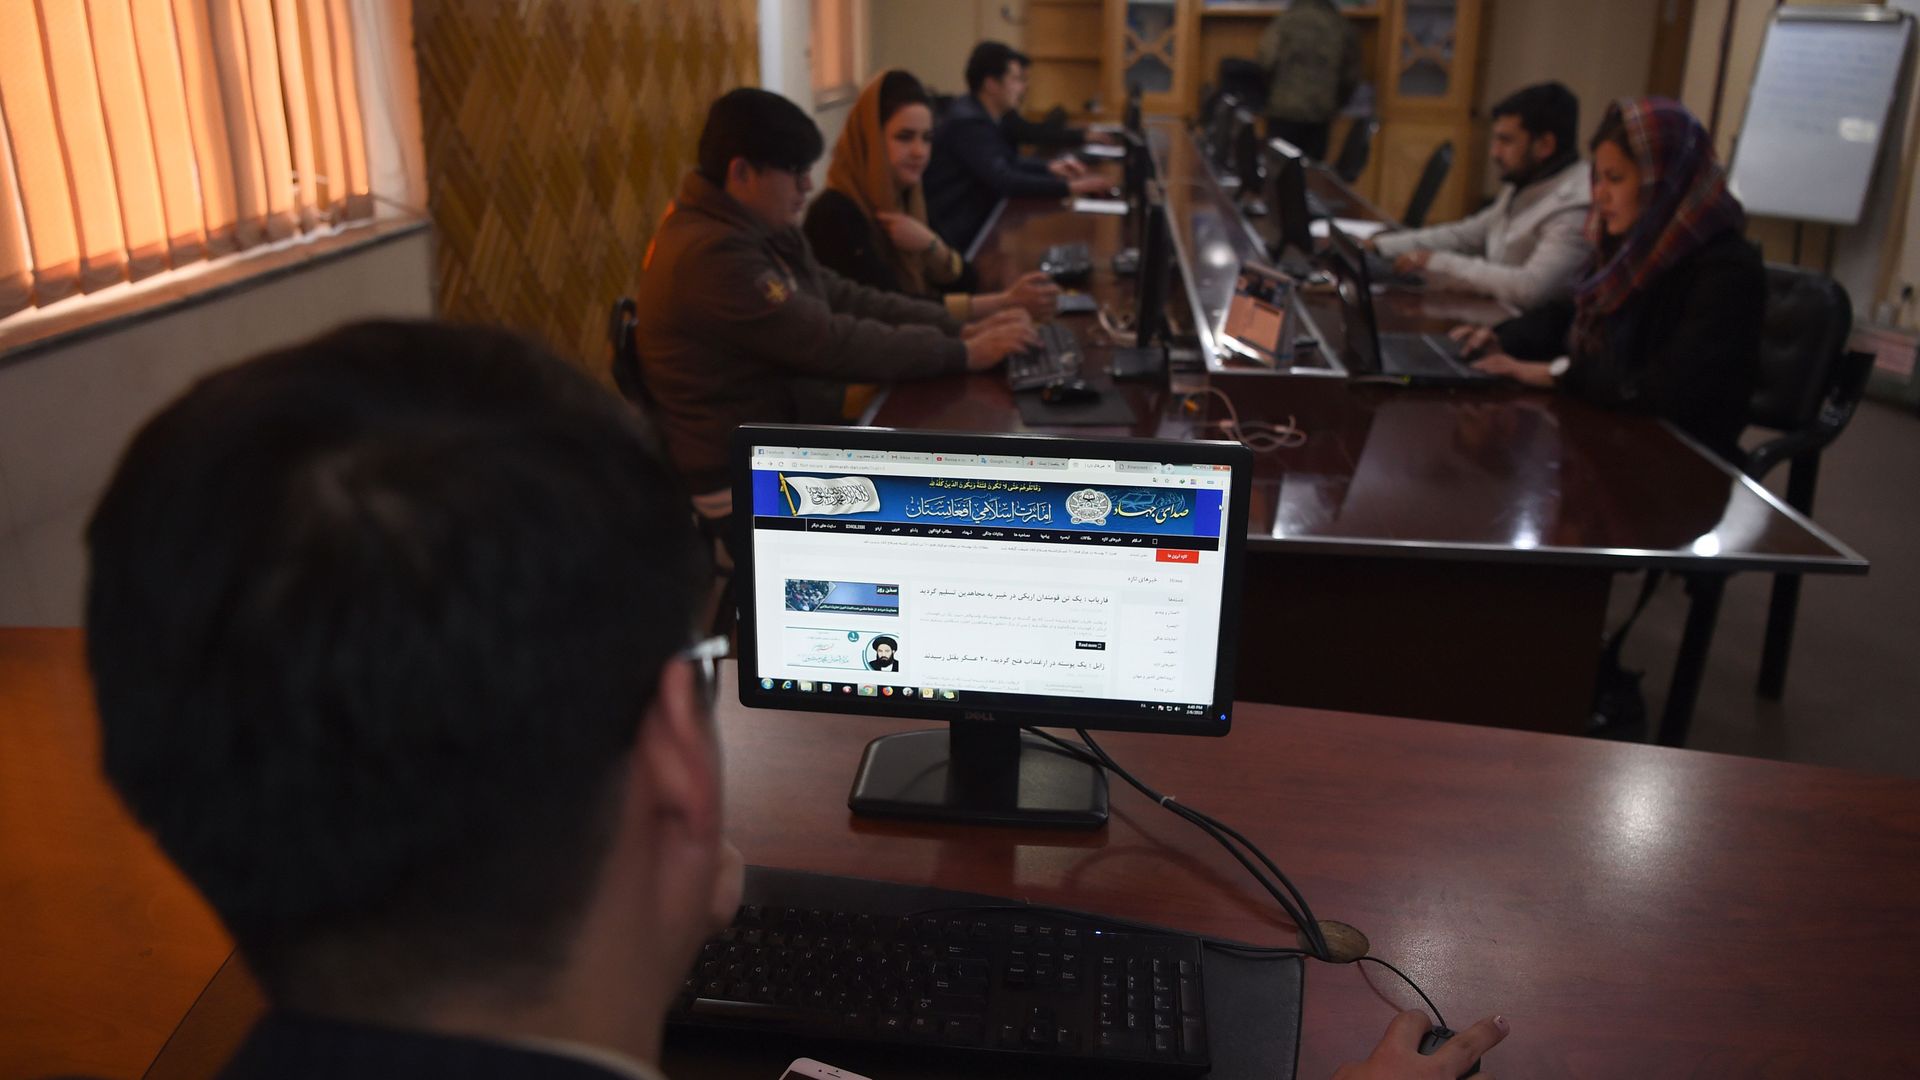 A man browses the Taliban's website in the newsroom at Maiwand TV station in Kabul